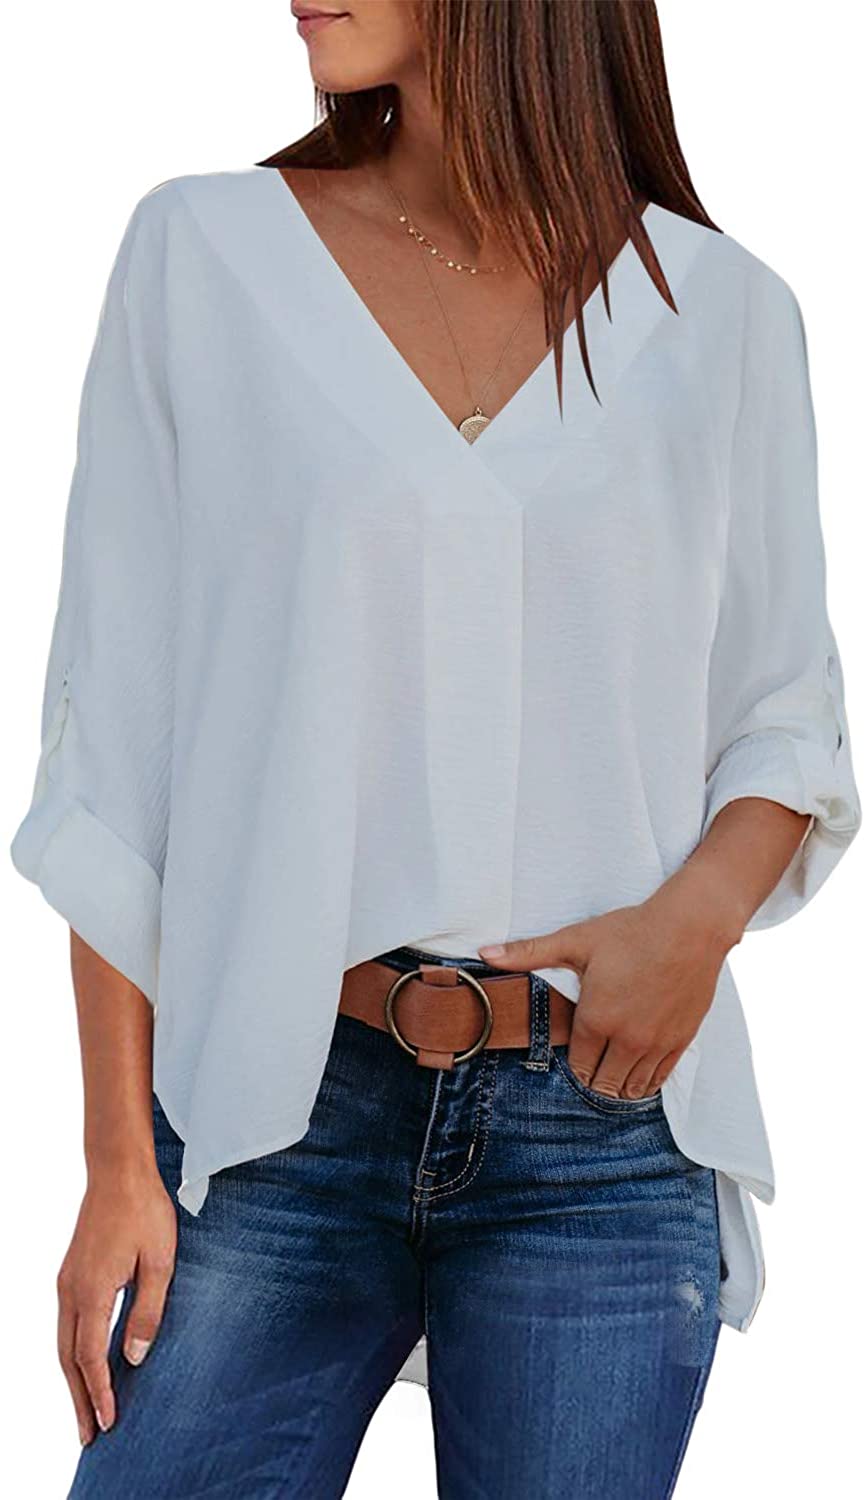 Astylish Women Casual Solid Cuffed Tab Sleeve High Low V Neck Blouse Tops